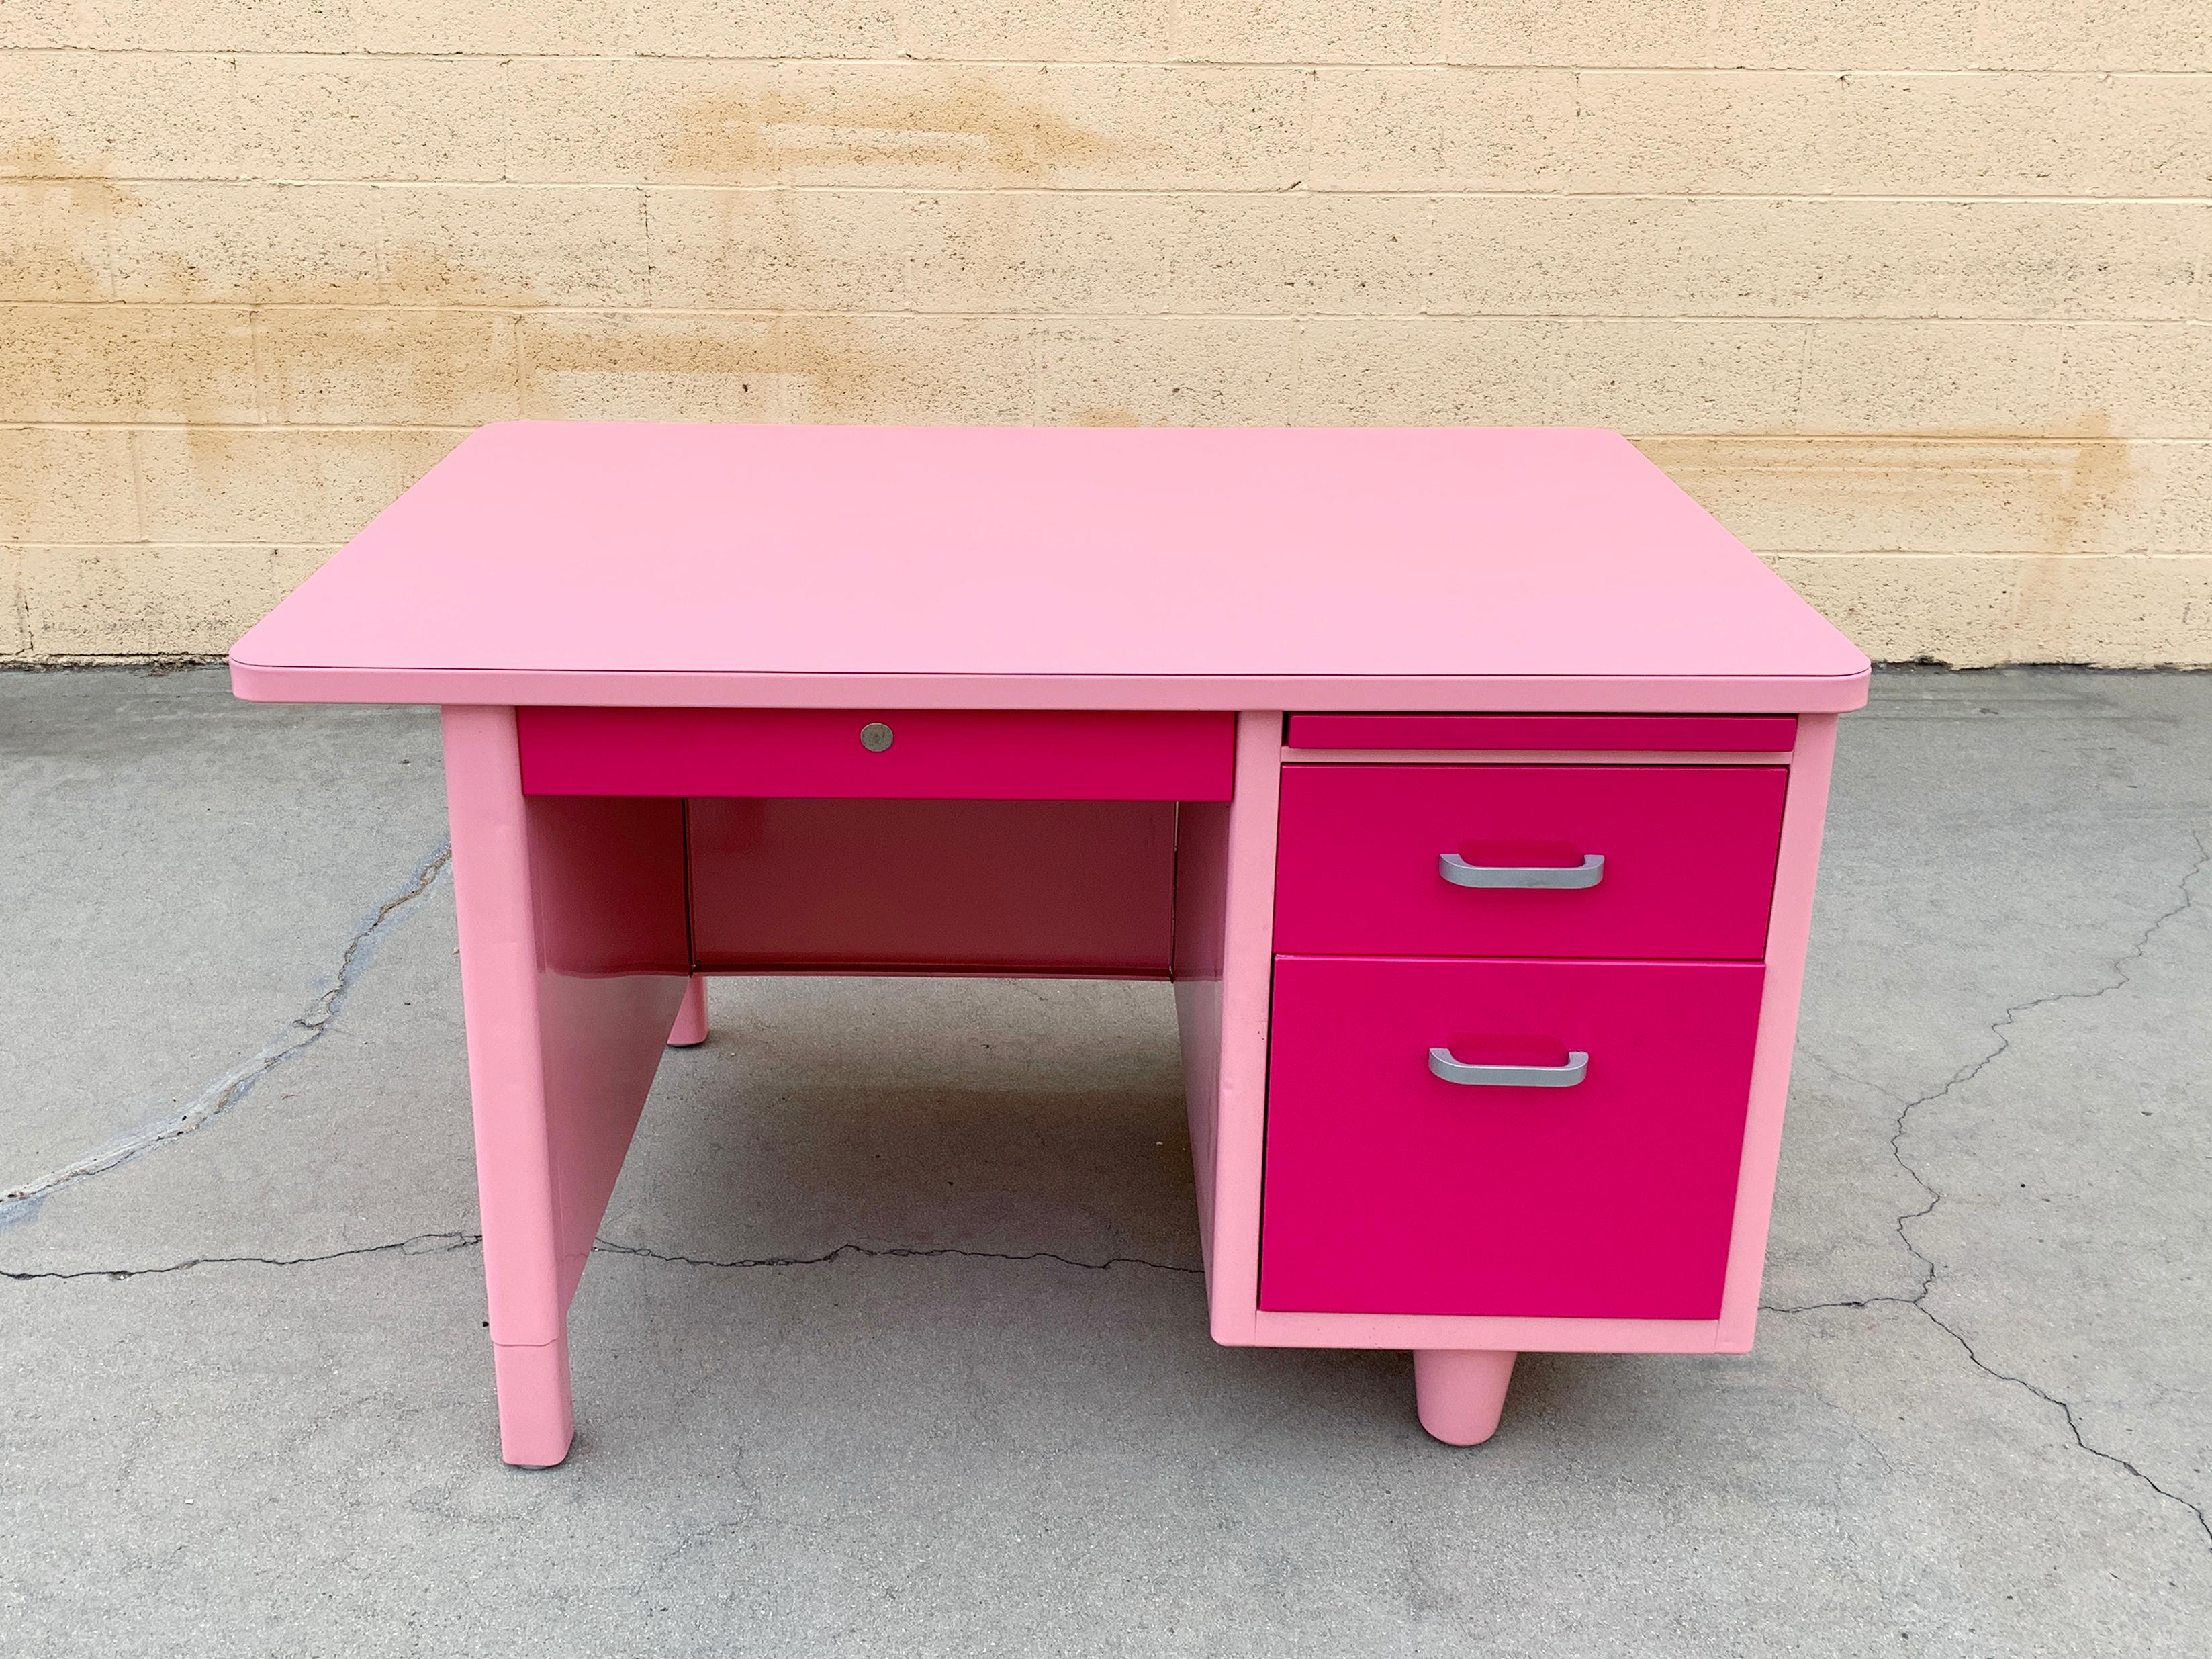 In stock and ready to ship! 

Who says tankers can't be cute?! This Classic 1960s single pedestal desk is pretty in pink and ready to add a little love to your space. Newly refinished in two-tone of RAL 4003 and RAL 3015 with brushed aluminum